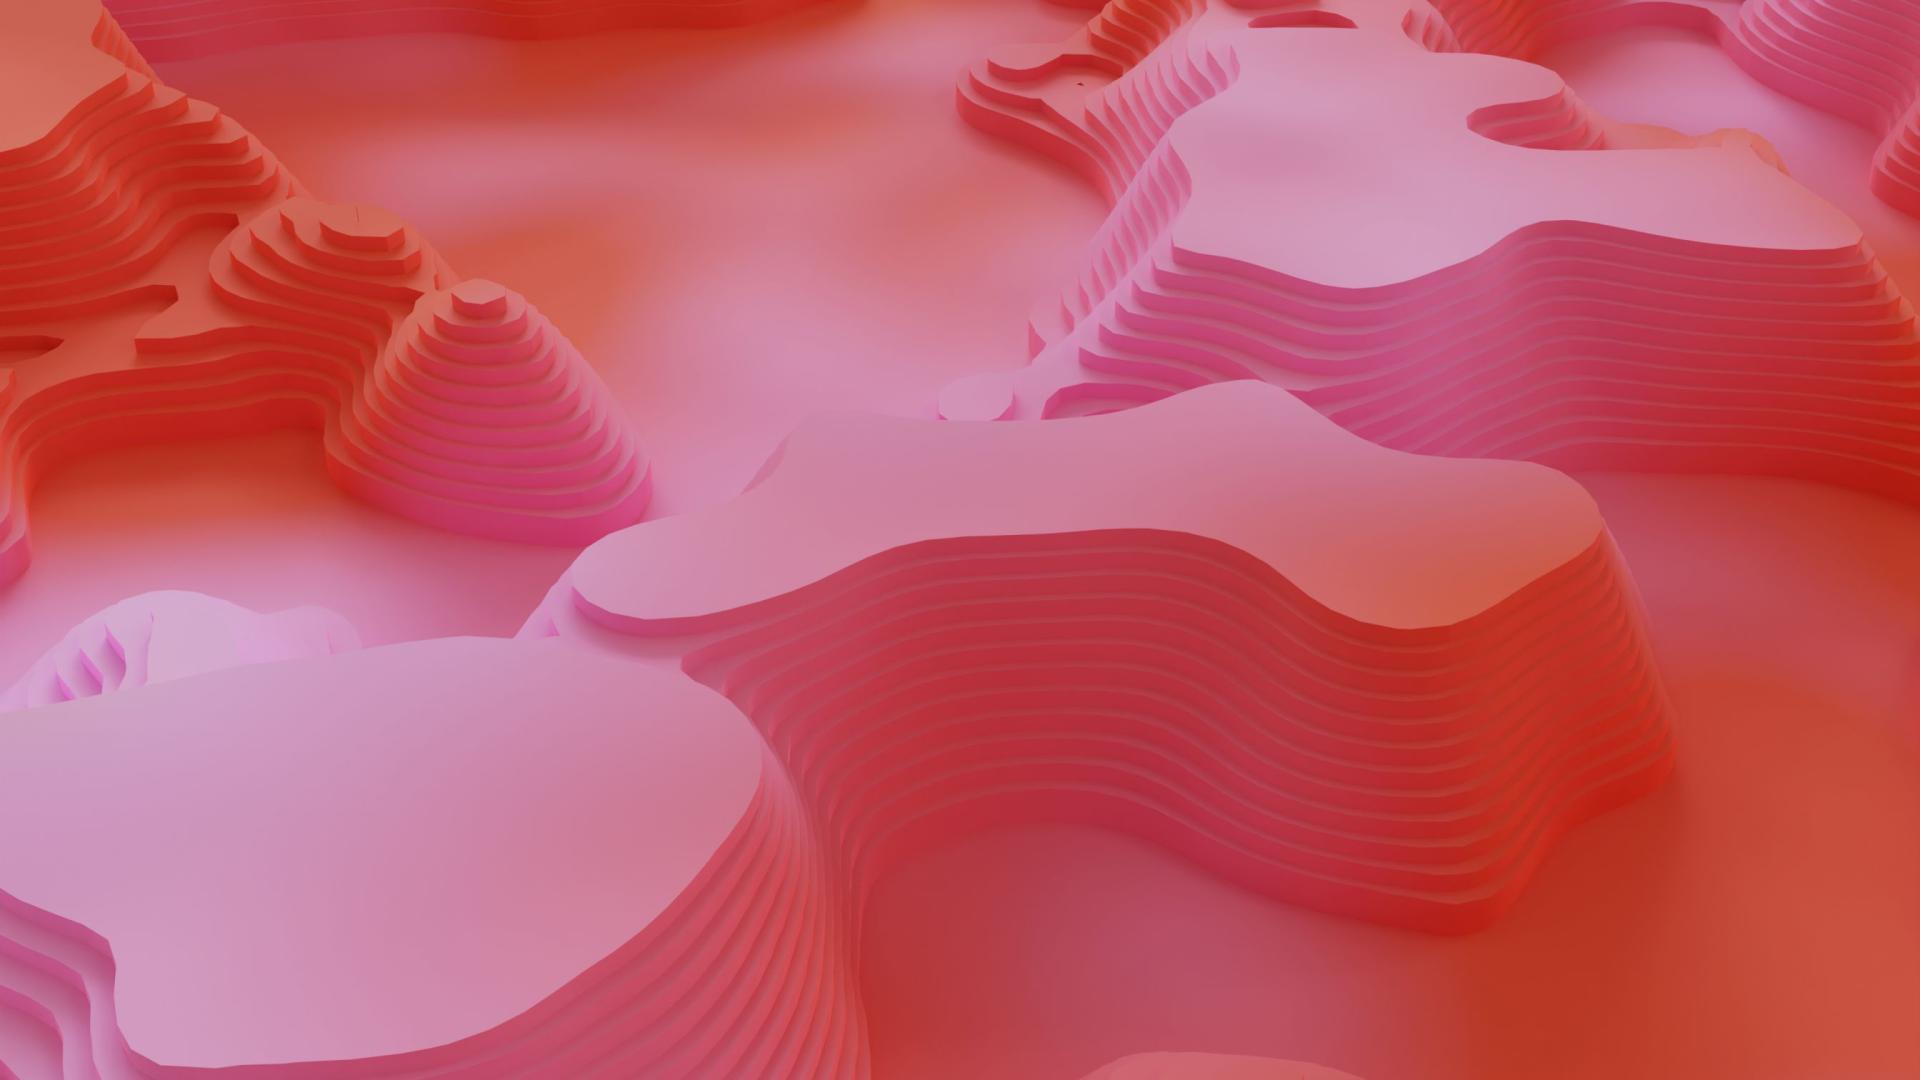 pink and orange curved shapes tiled on top of each other in descending size